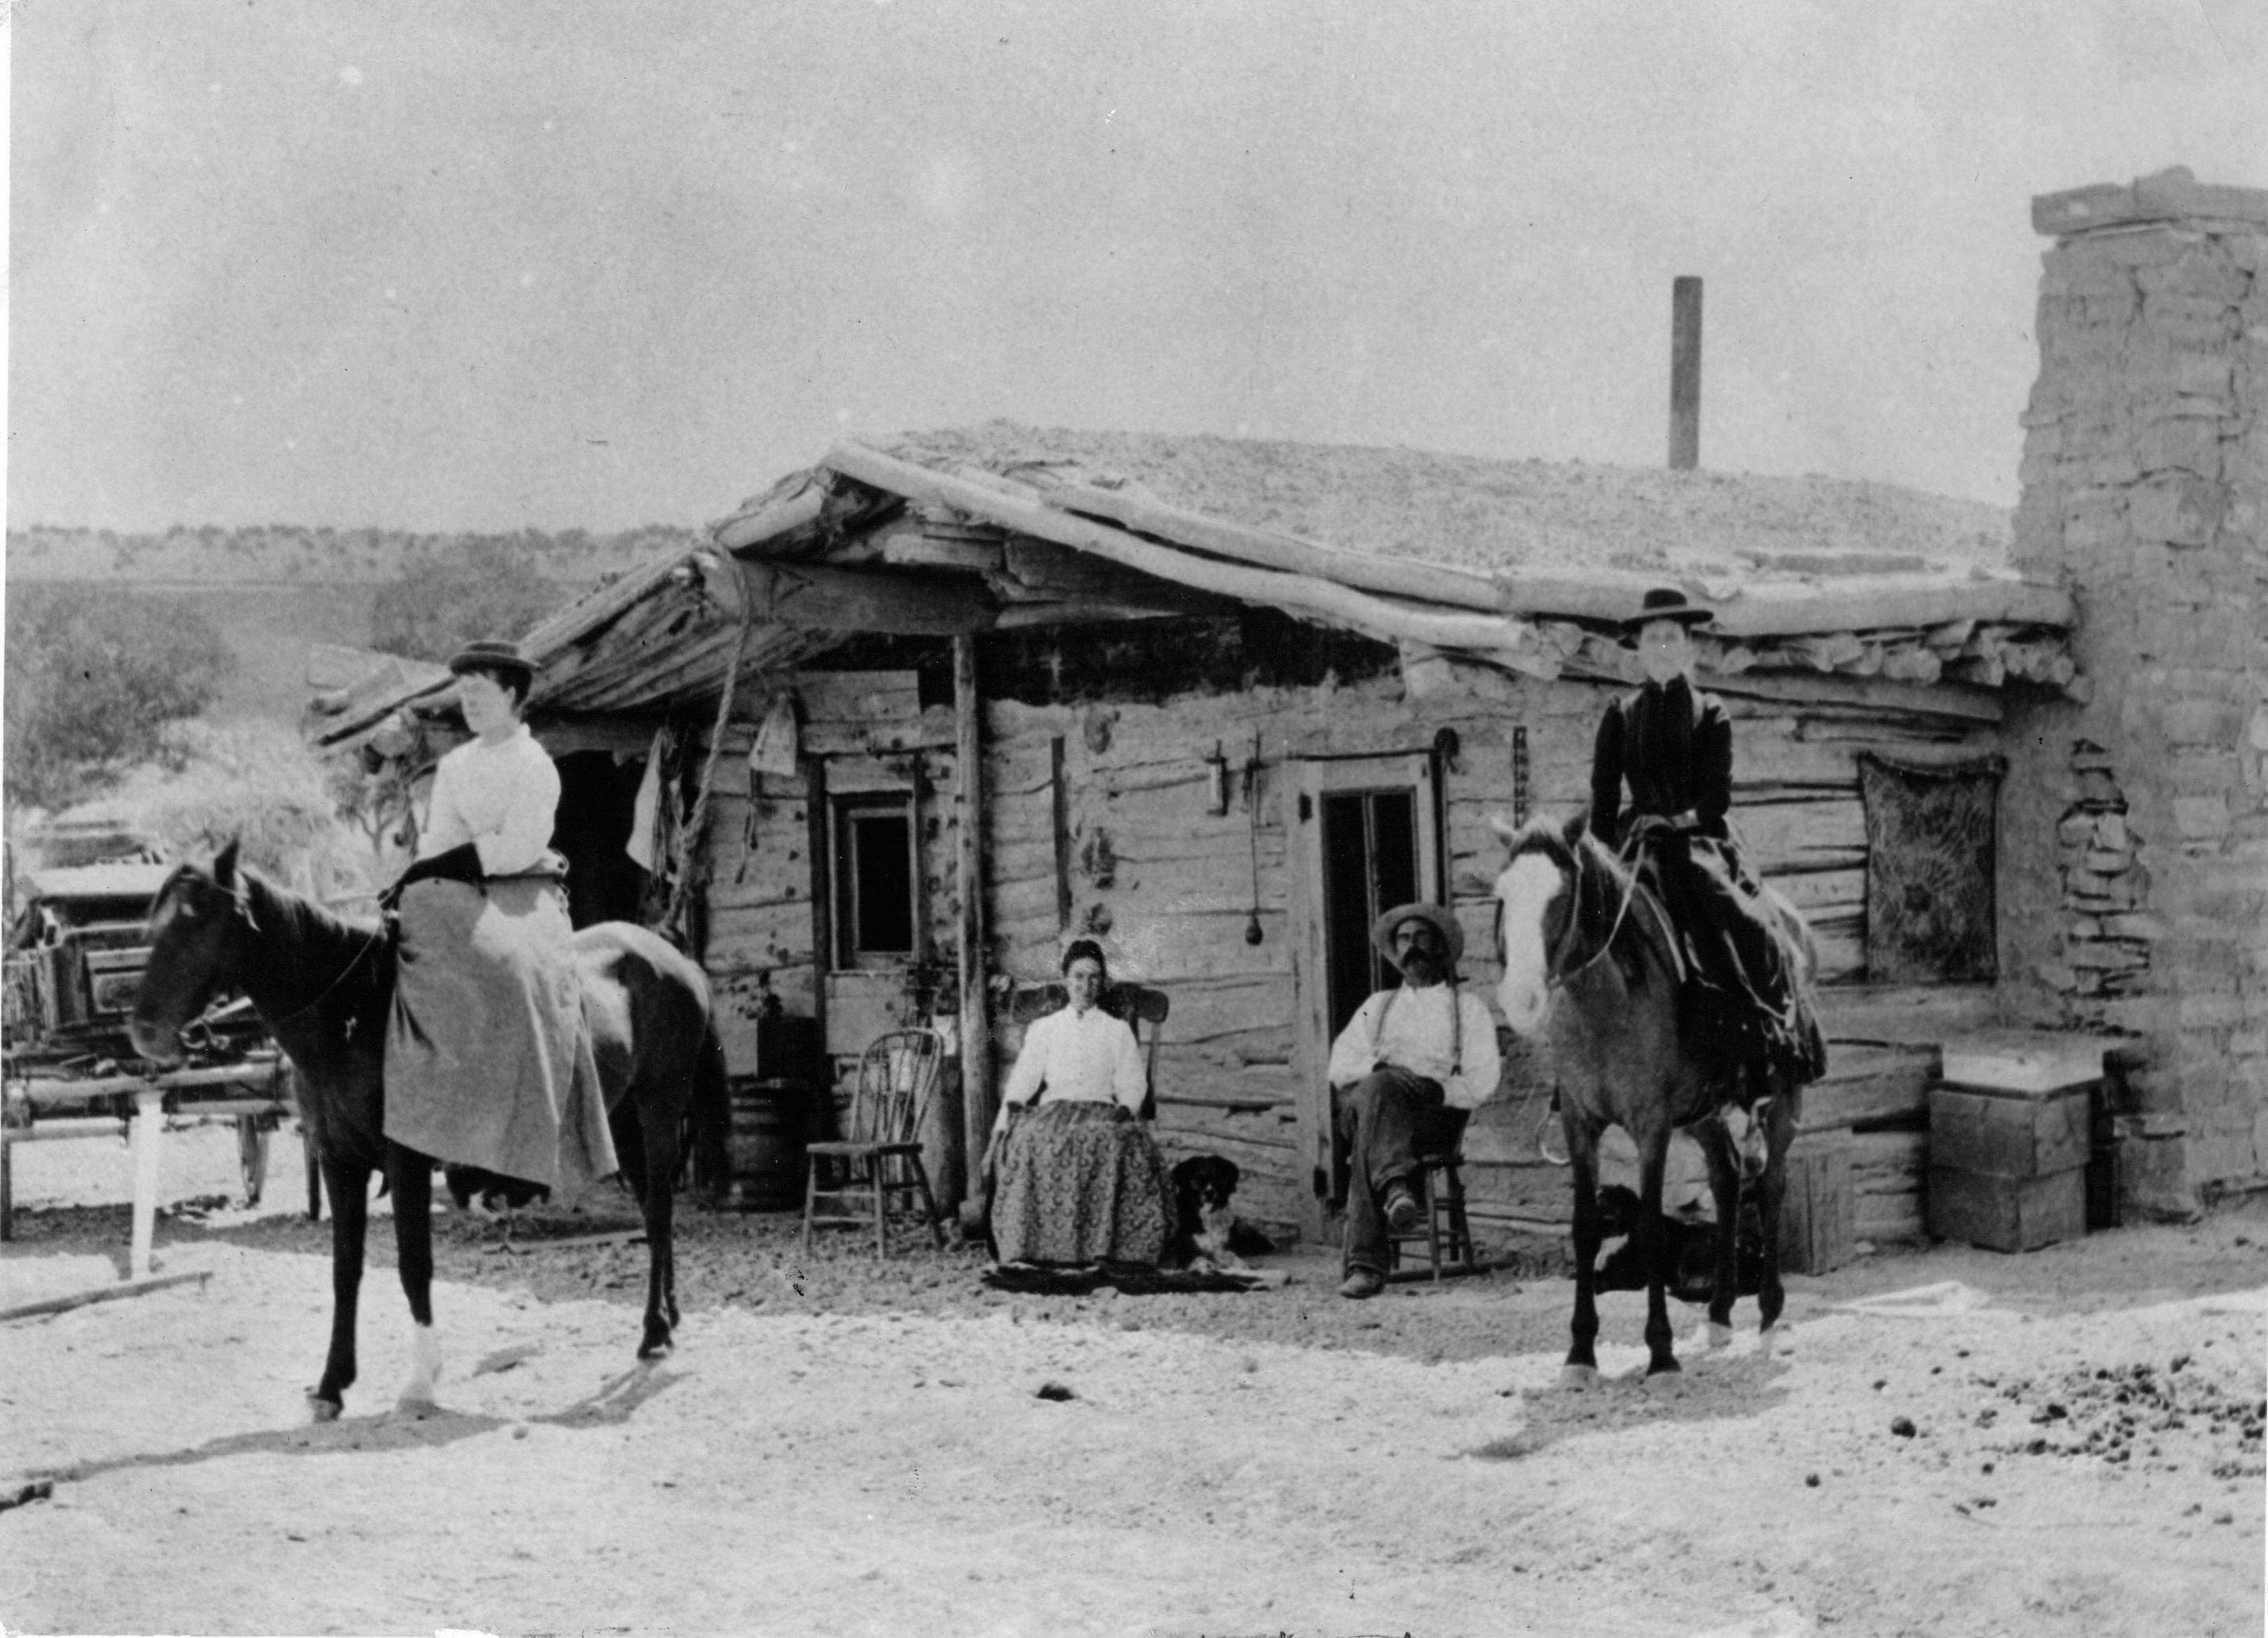 Homestead of Mr. and Mrs. W,E, Davis in Westwater Utah in 1890. Photo # 2004.44.933, Museums of Western Colorado.